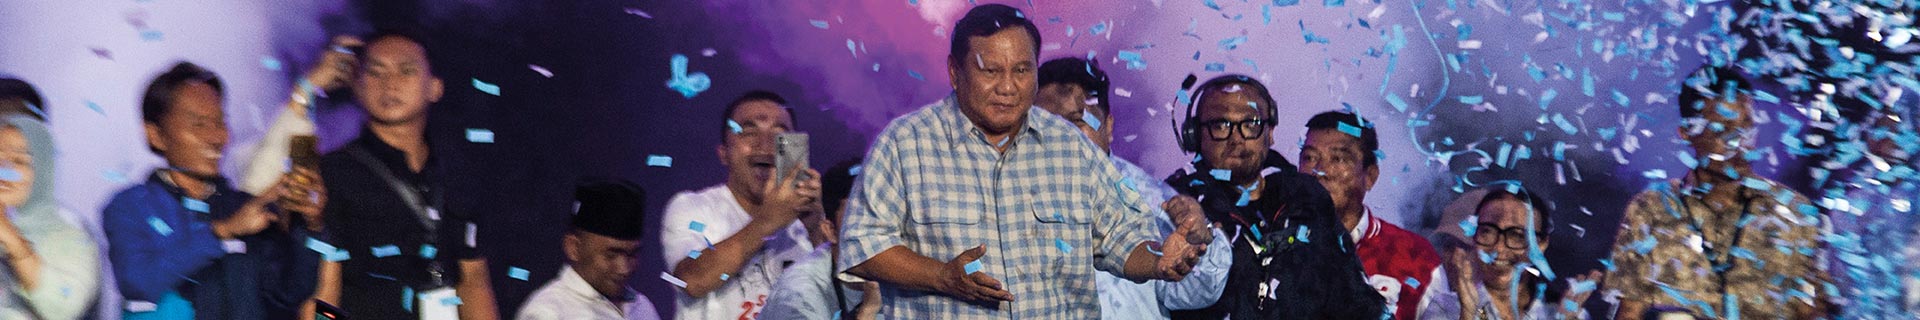 Indonesia elections: Prabowo win signals troubling times ahead